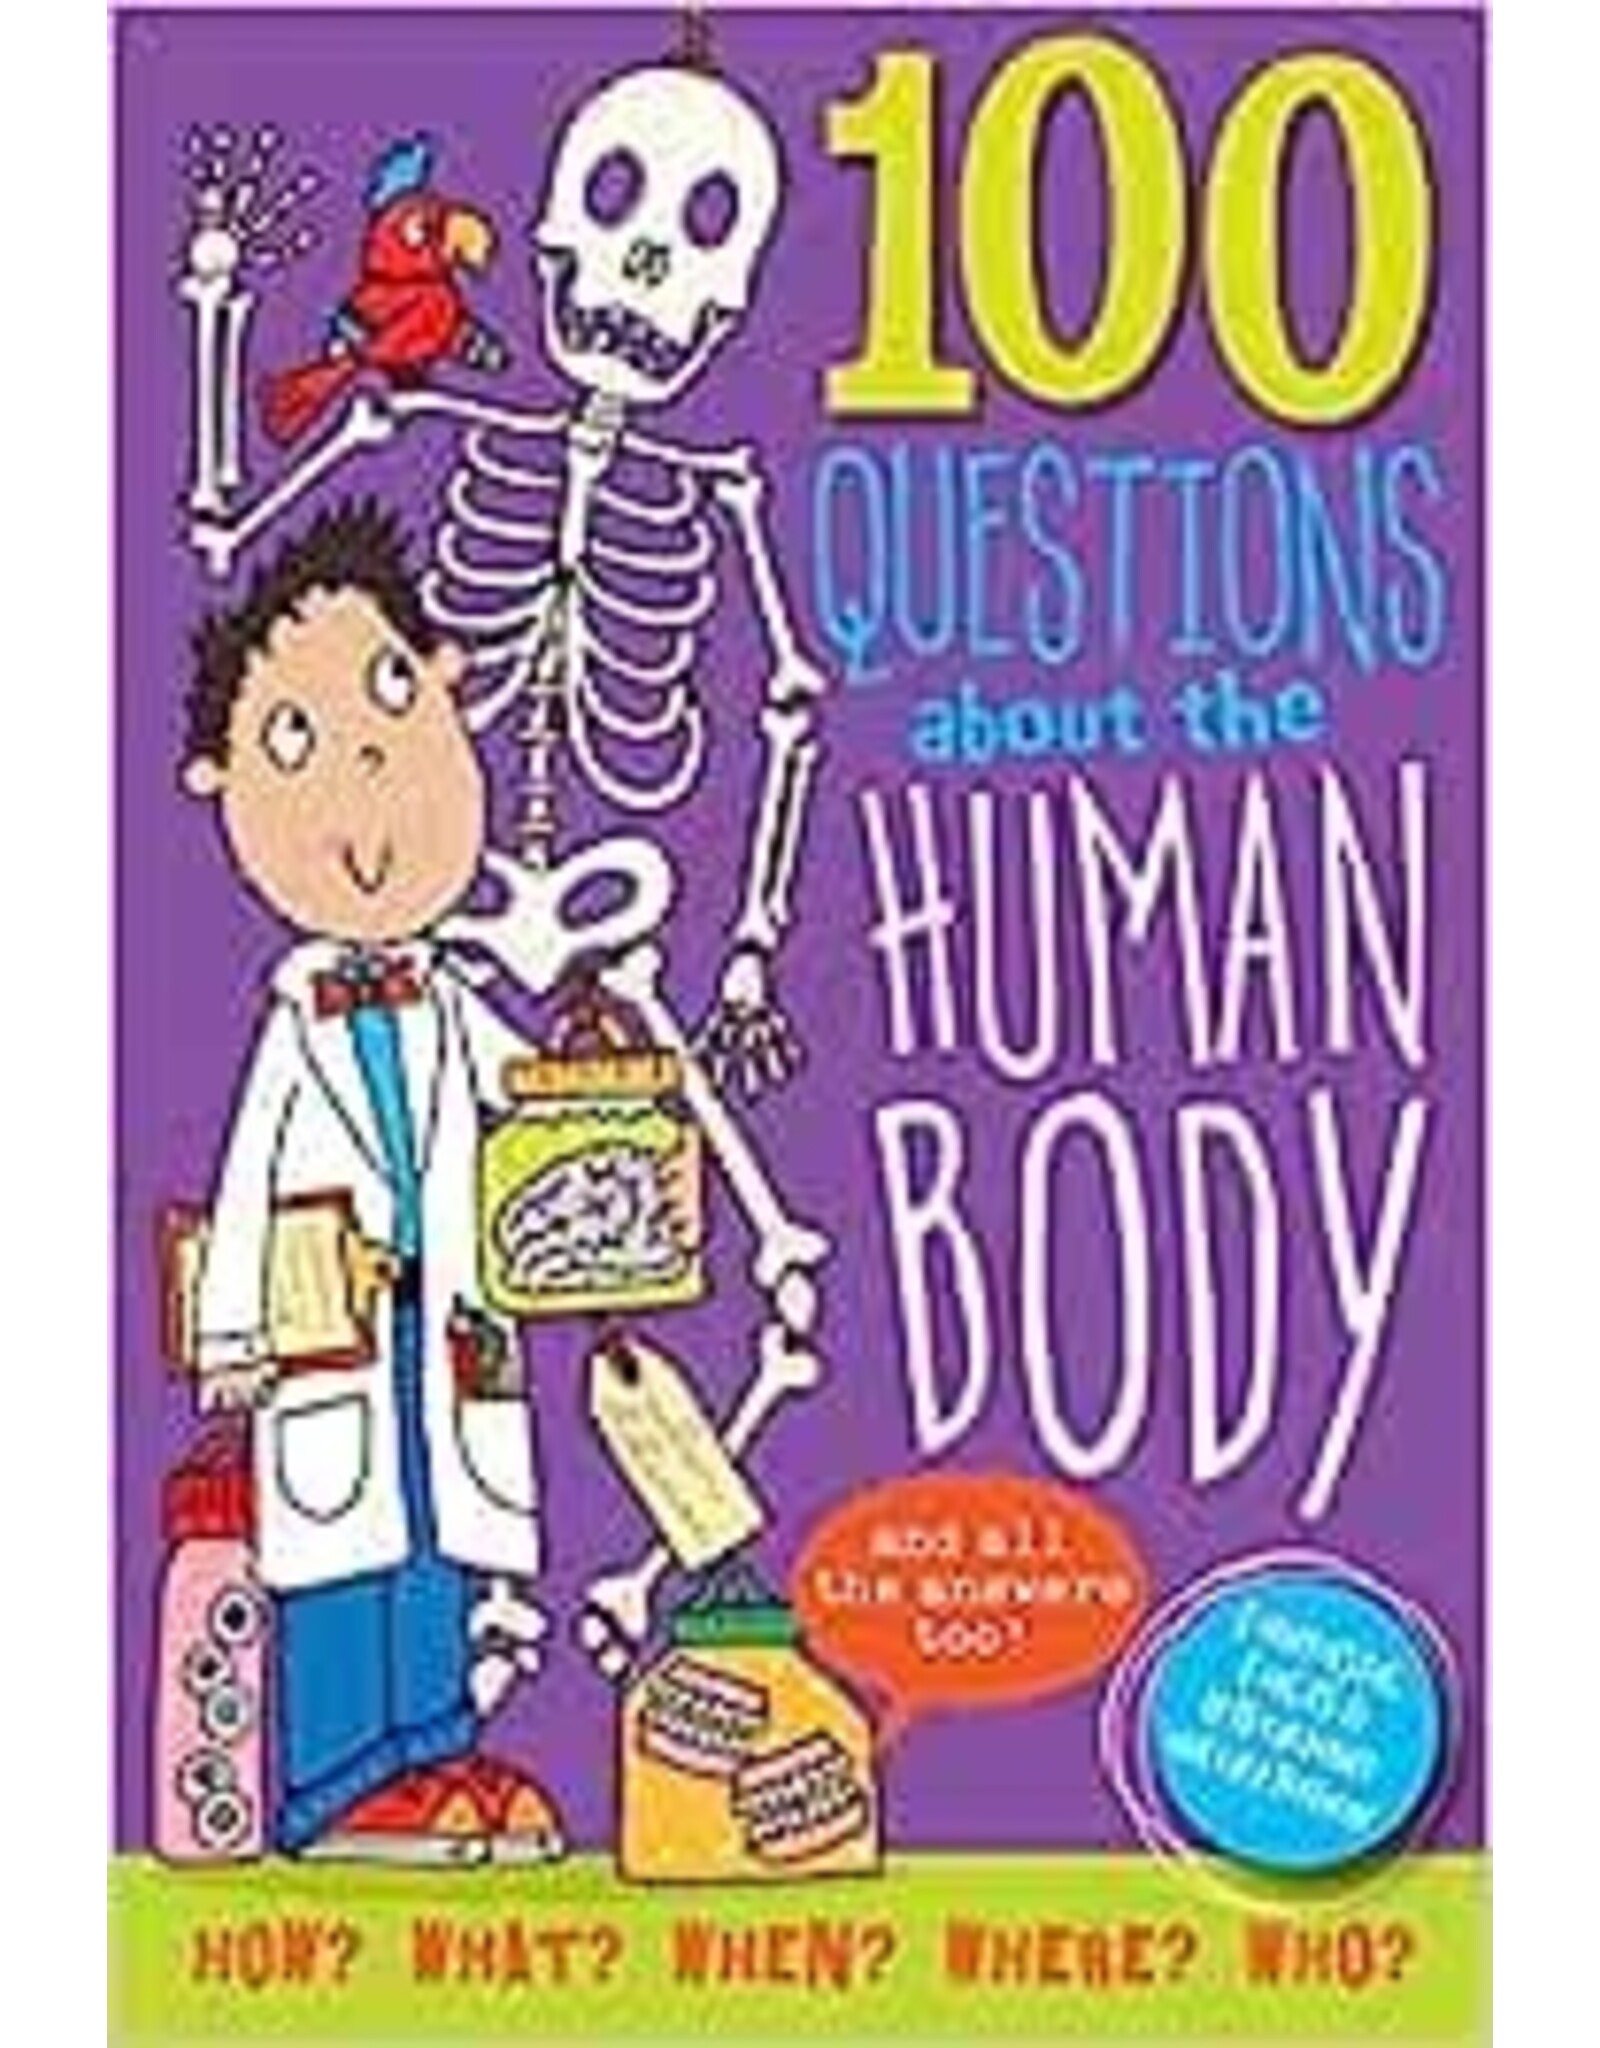 100 Questions - Human Body